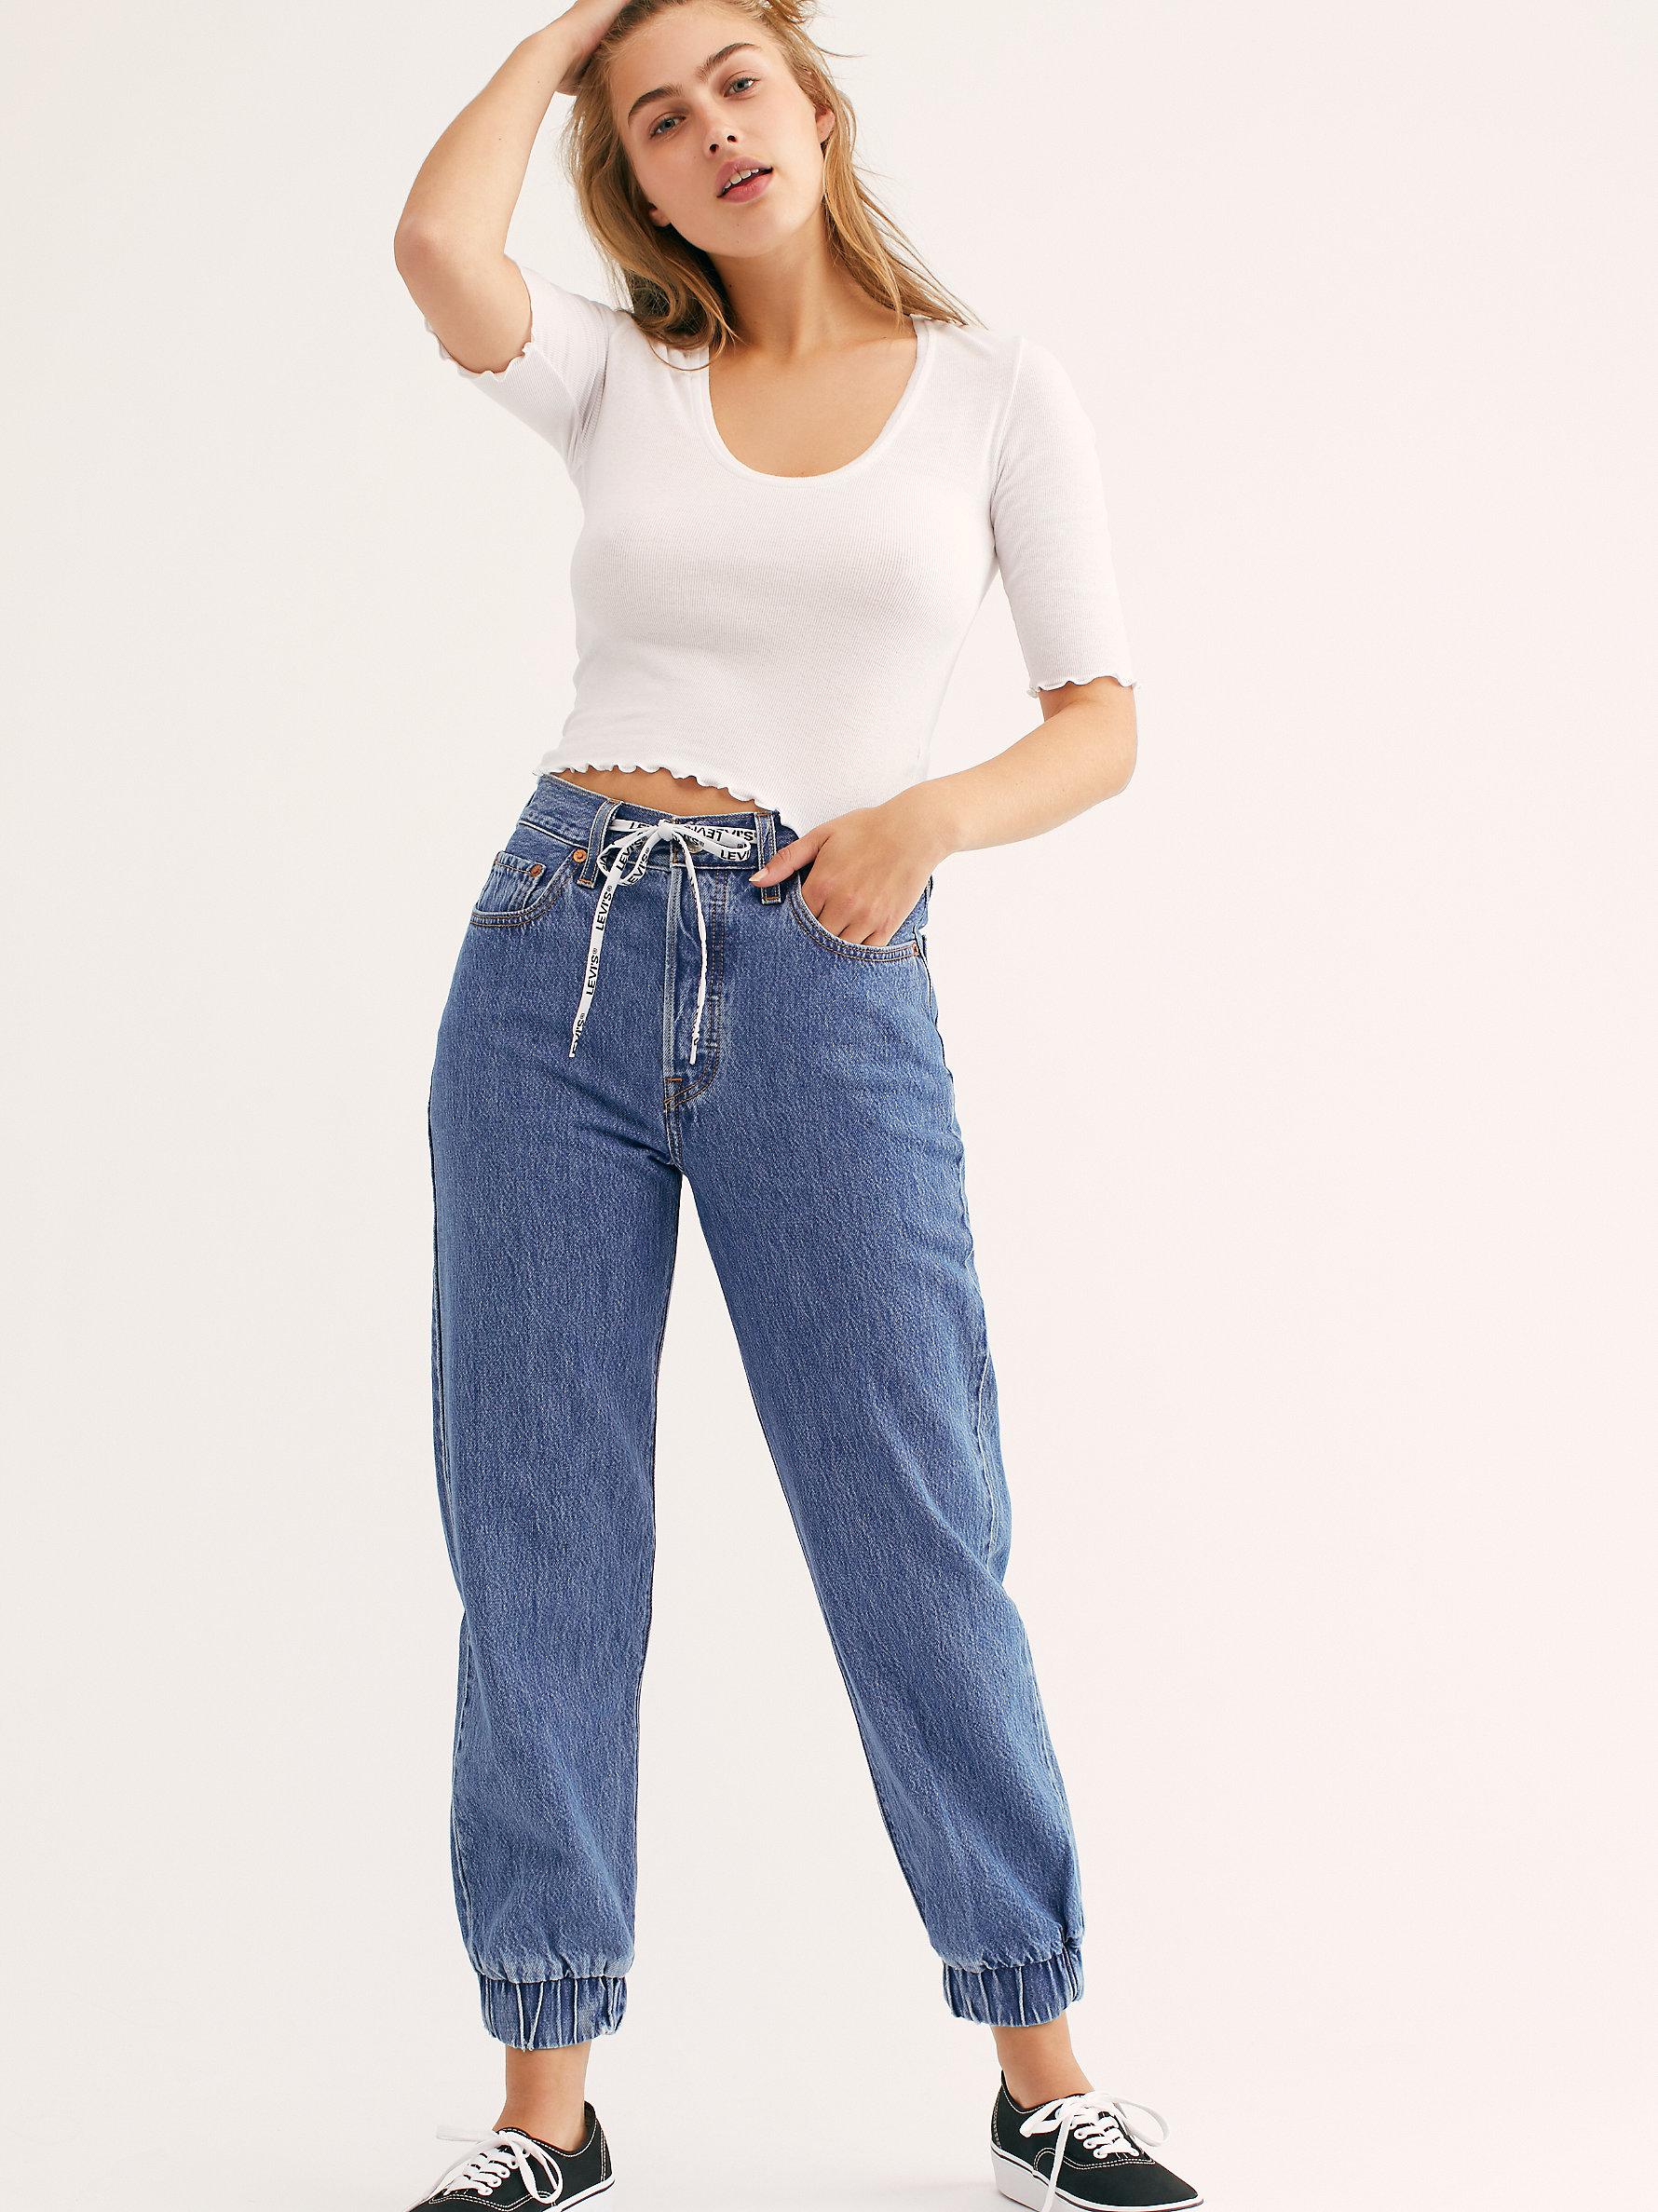 Free People Levi's 501 Jogger Jeans By Levi's in Blue | Lyst Canada